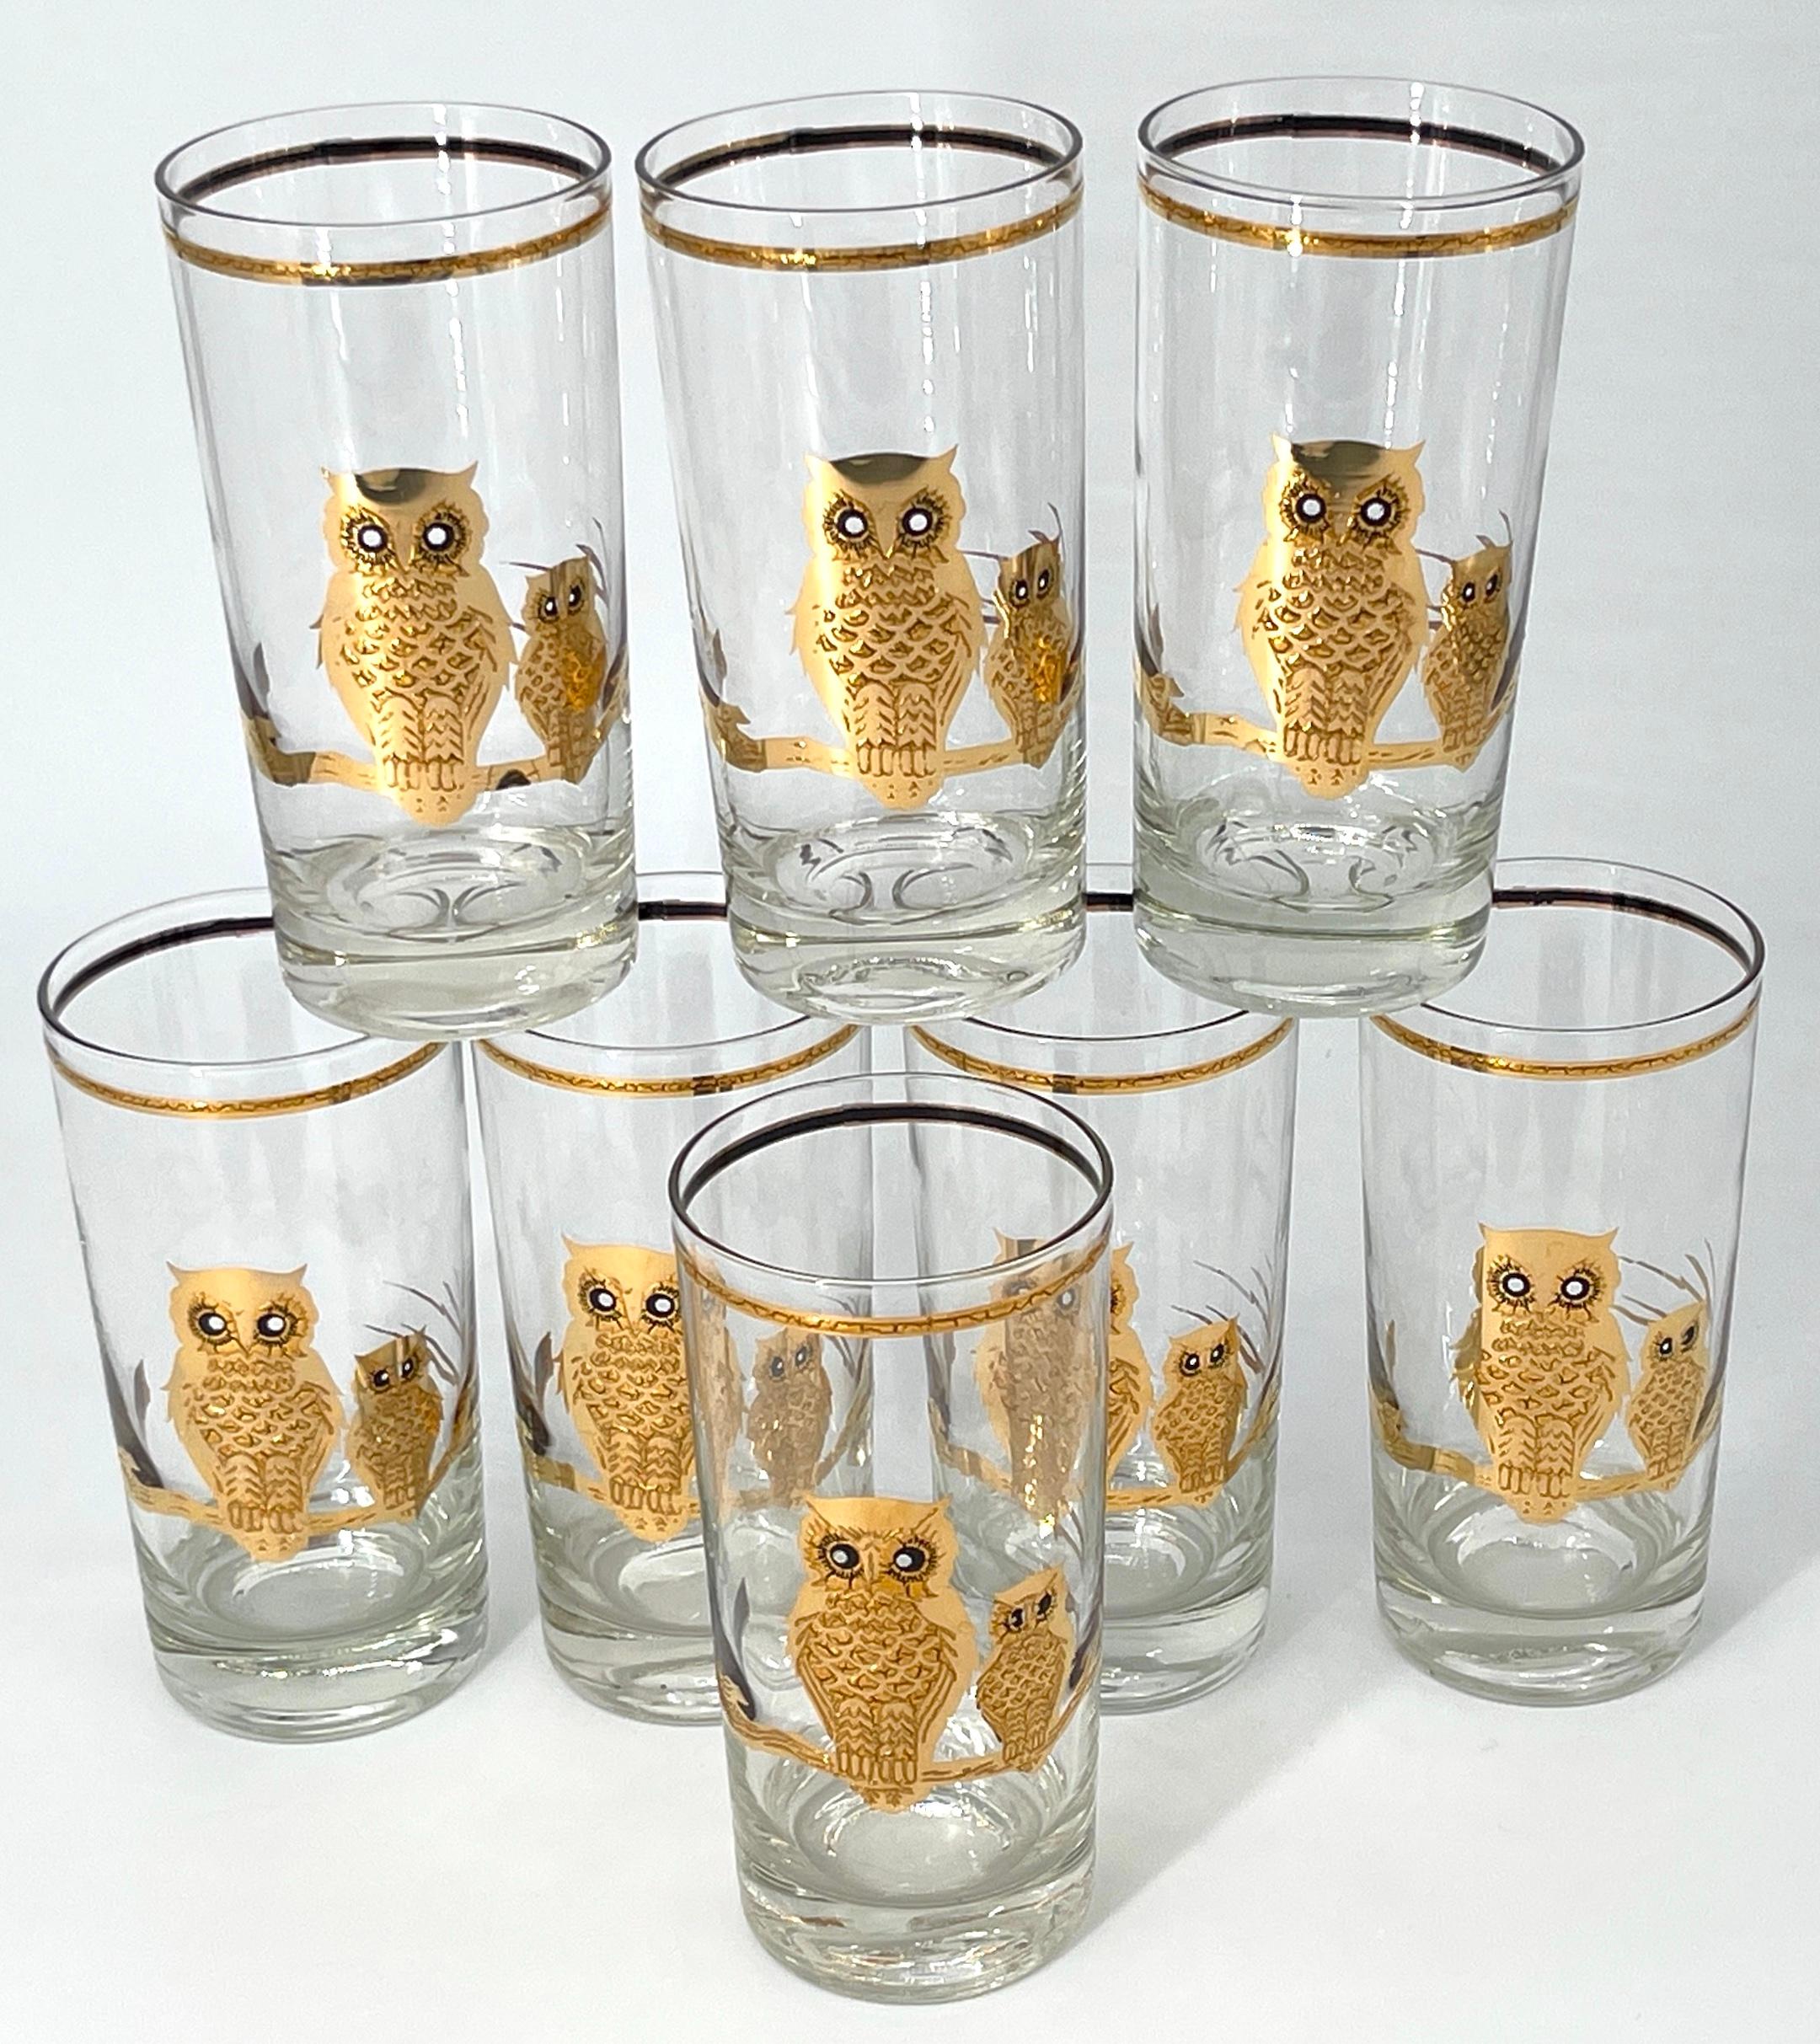 8 Culver, Signed Vintage Mid-Century Barware, 22K Gilded Gold Owls, Highball Tumbler Drinking Glasses, 
USA, Circa 1950s

A set of 8 vintage Culver highball/tall glasses, a true gems from the mid-century era. Made in the USA circa 1950s, these